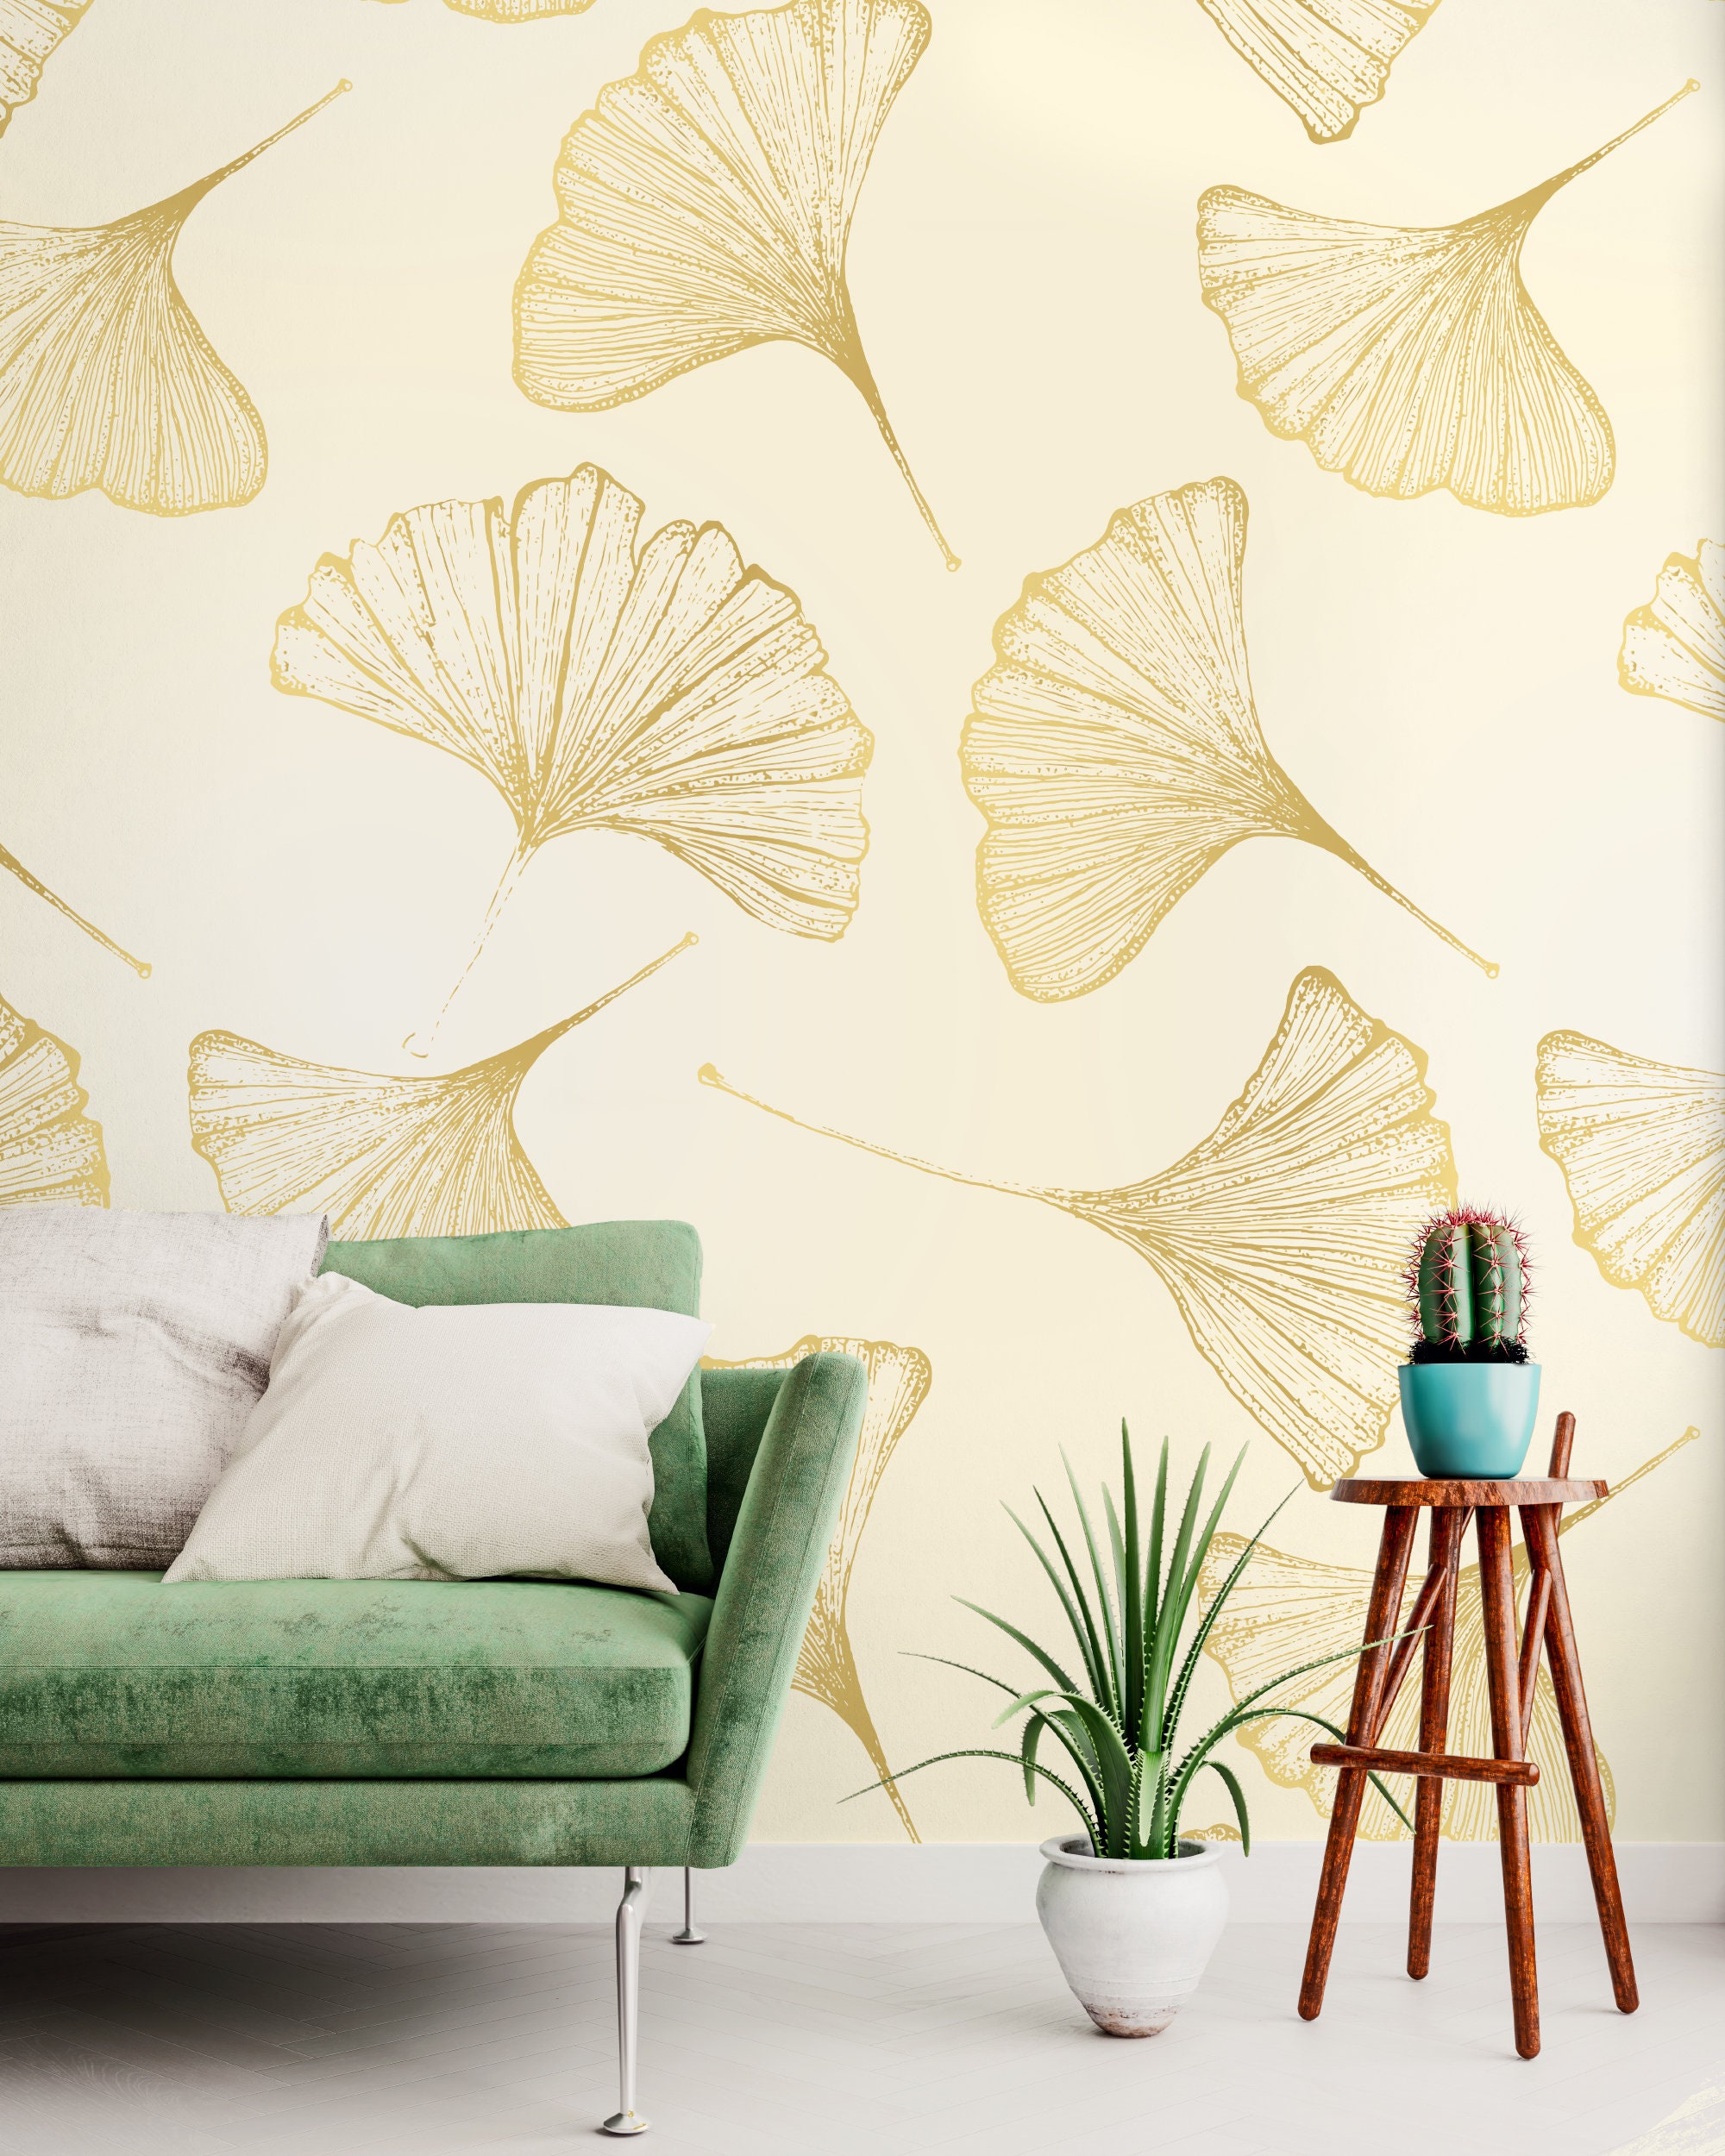 Details about   Photo wallpaper Wall mural Removable Self-adhesive Maple leafs 